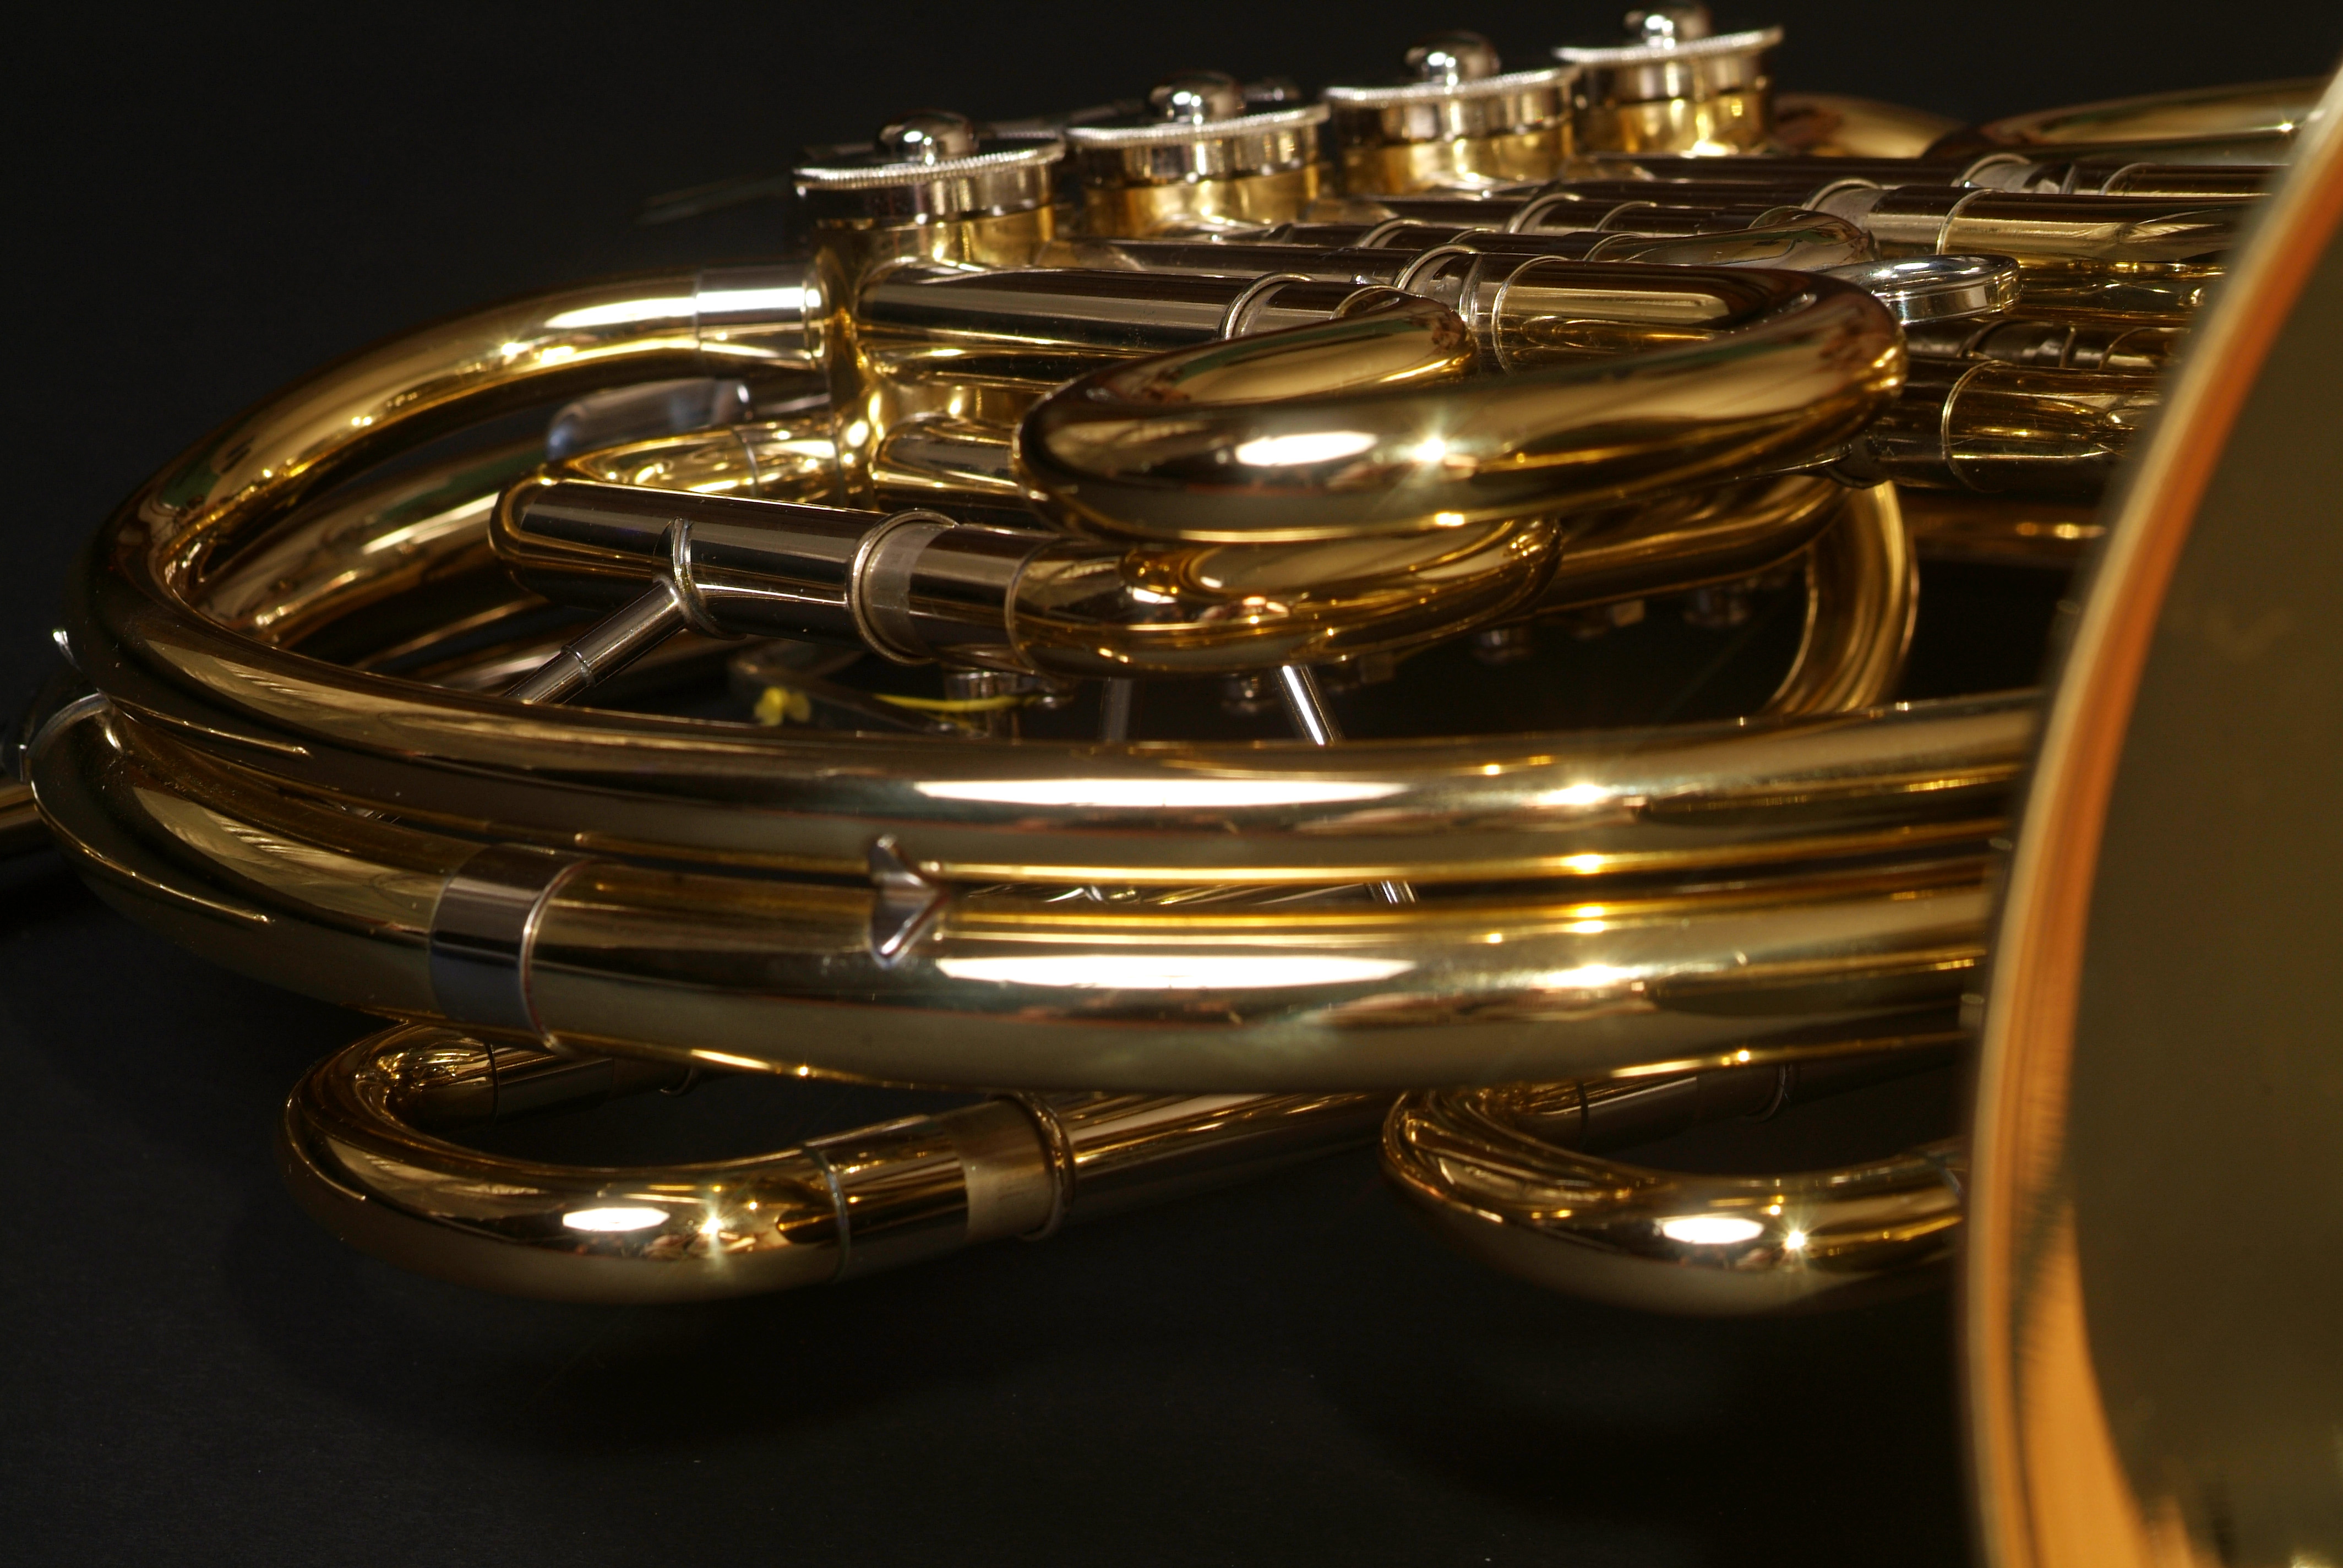 Photo of a French horn